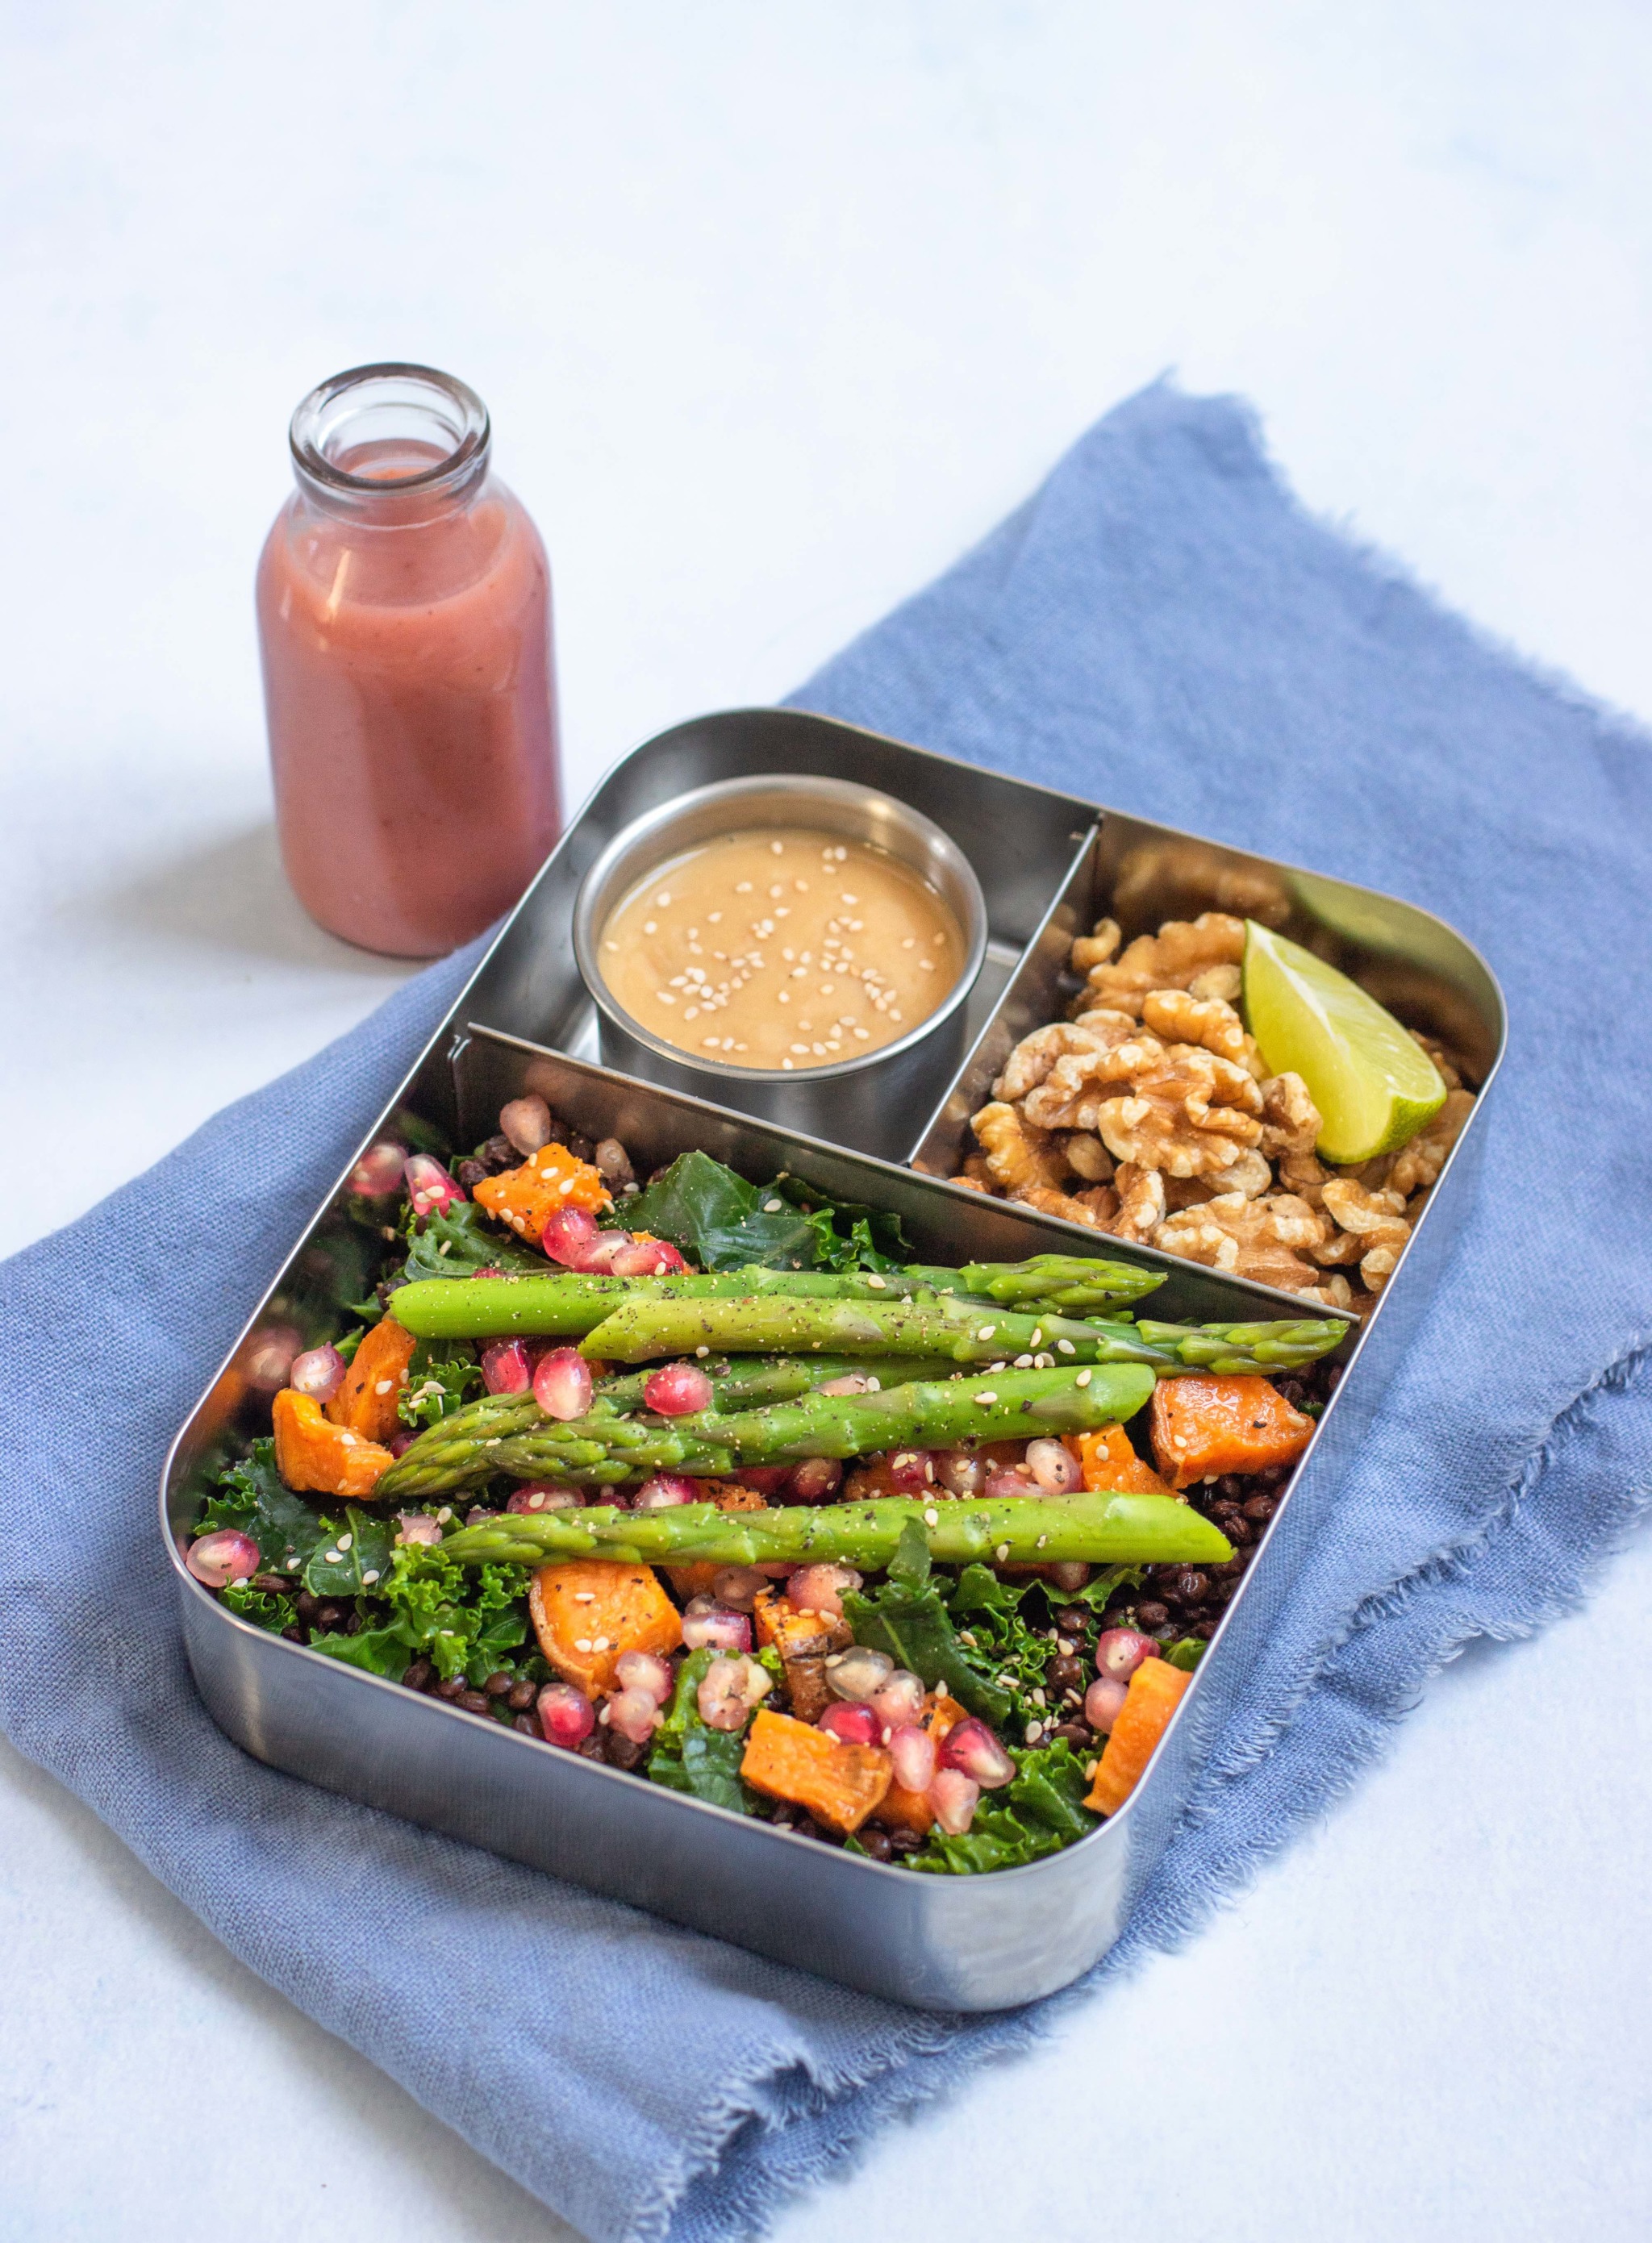 Kale, Sweet Potato and Pomegranate Lunchbox with a Miso Dressing Lily Soutter